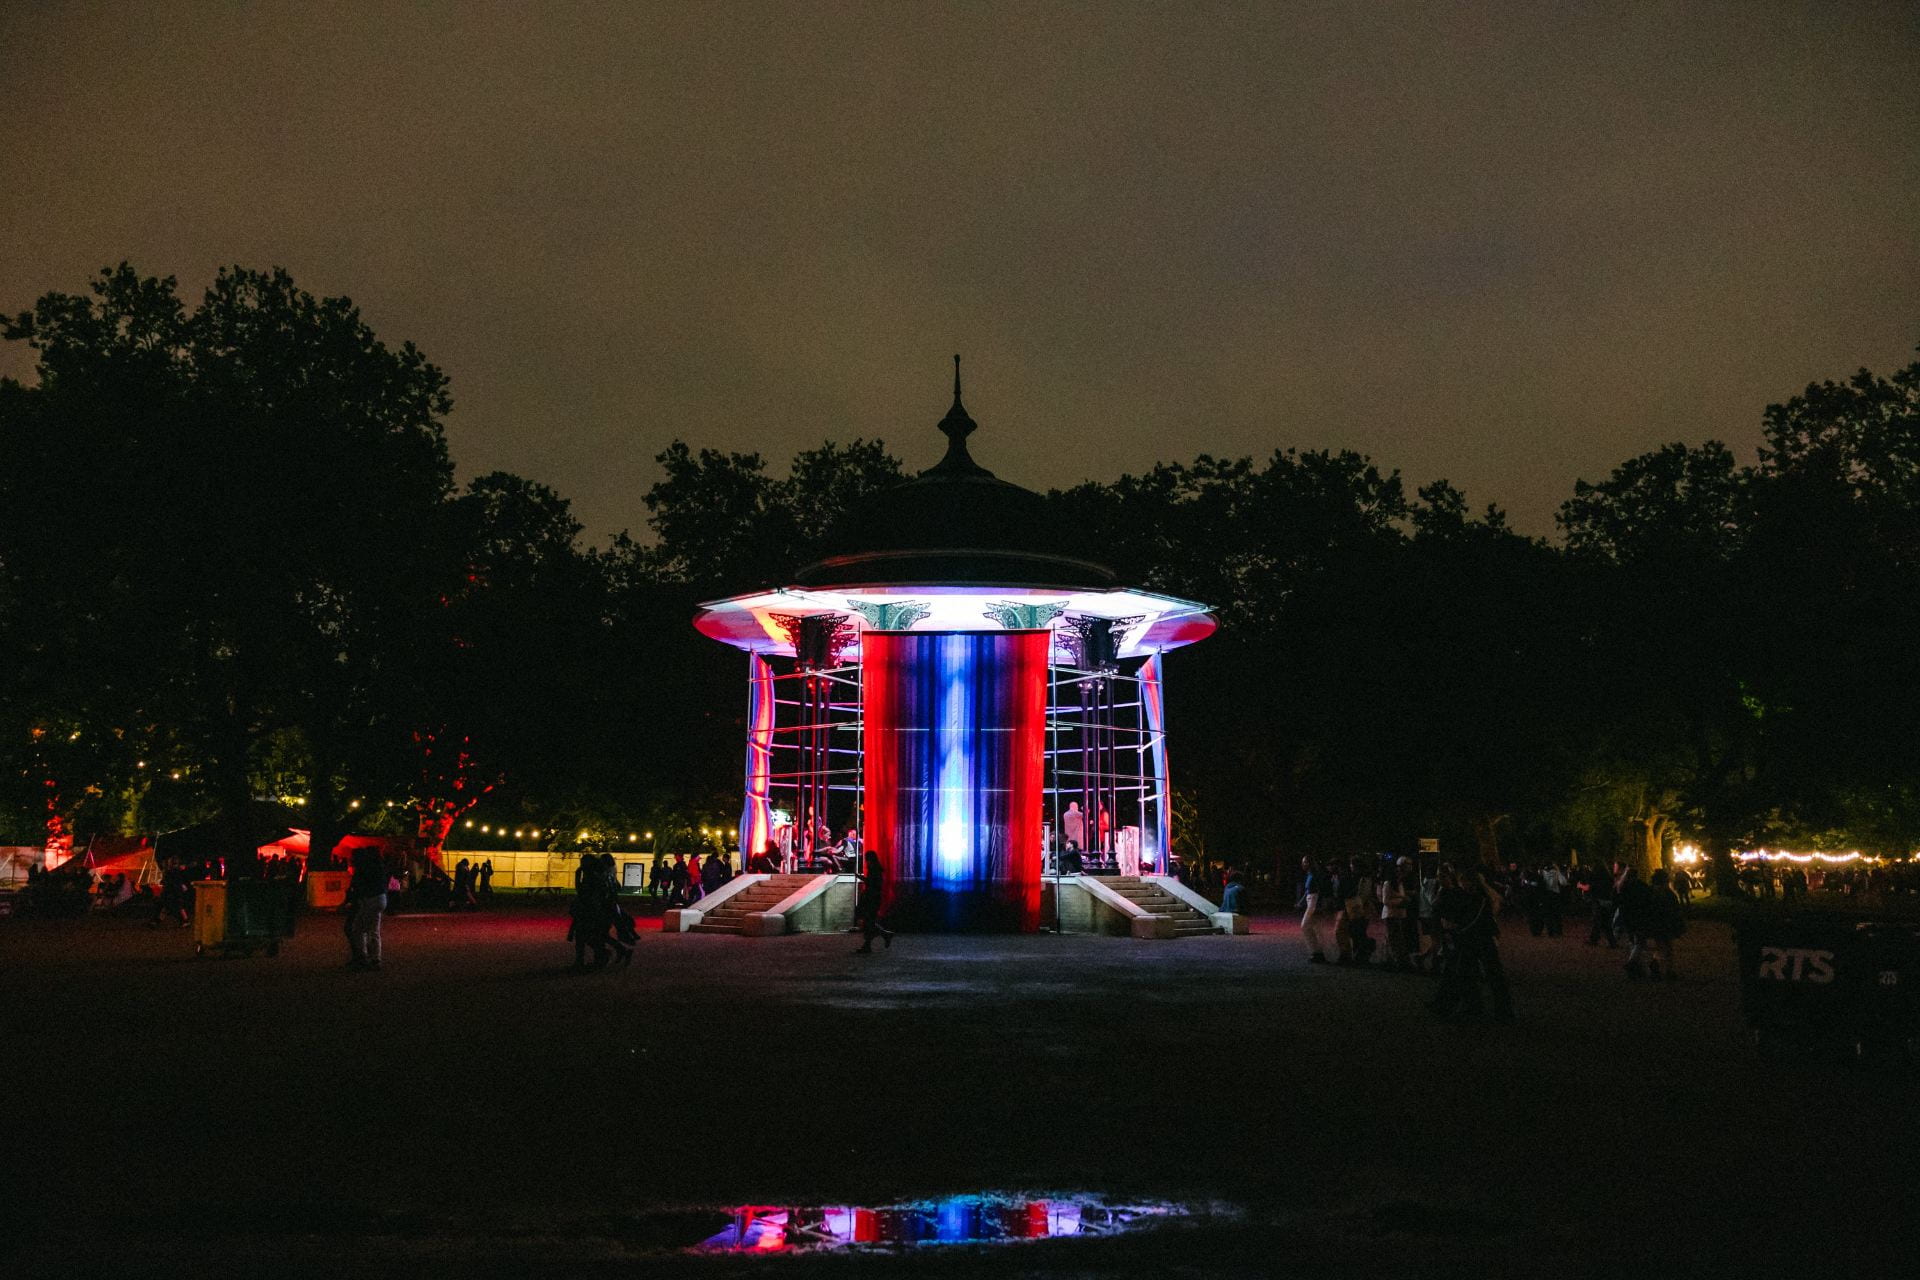 A bandstand draped in red and blue fabric is lit by spotlights during the evening at Rally festival.